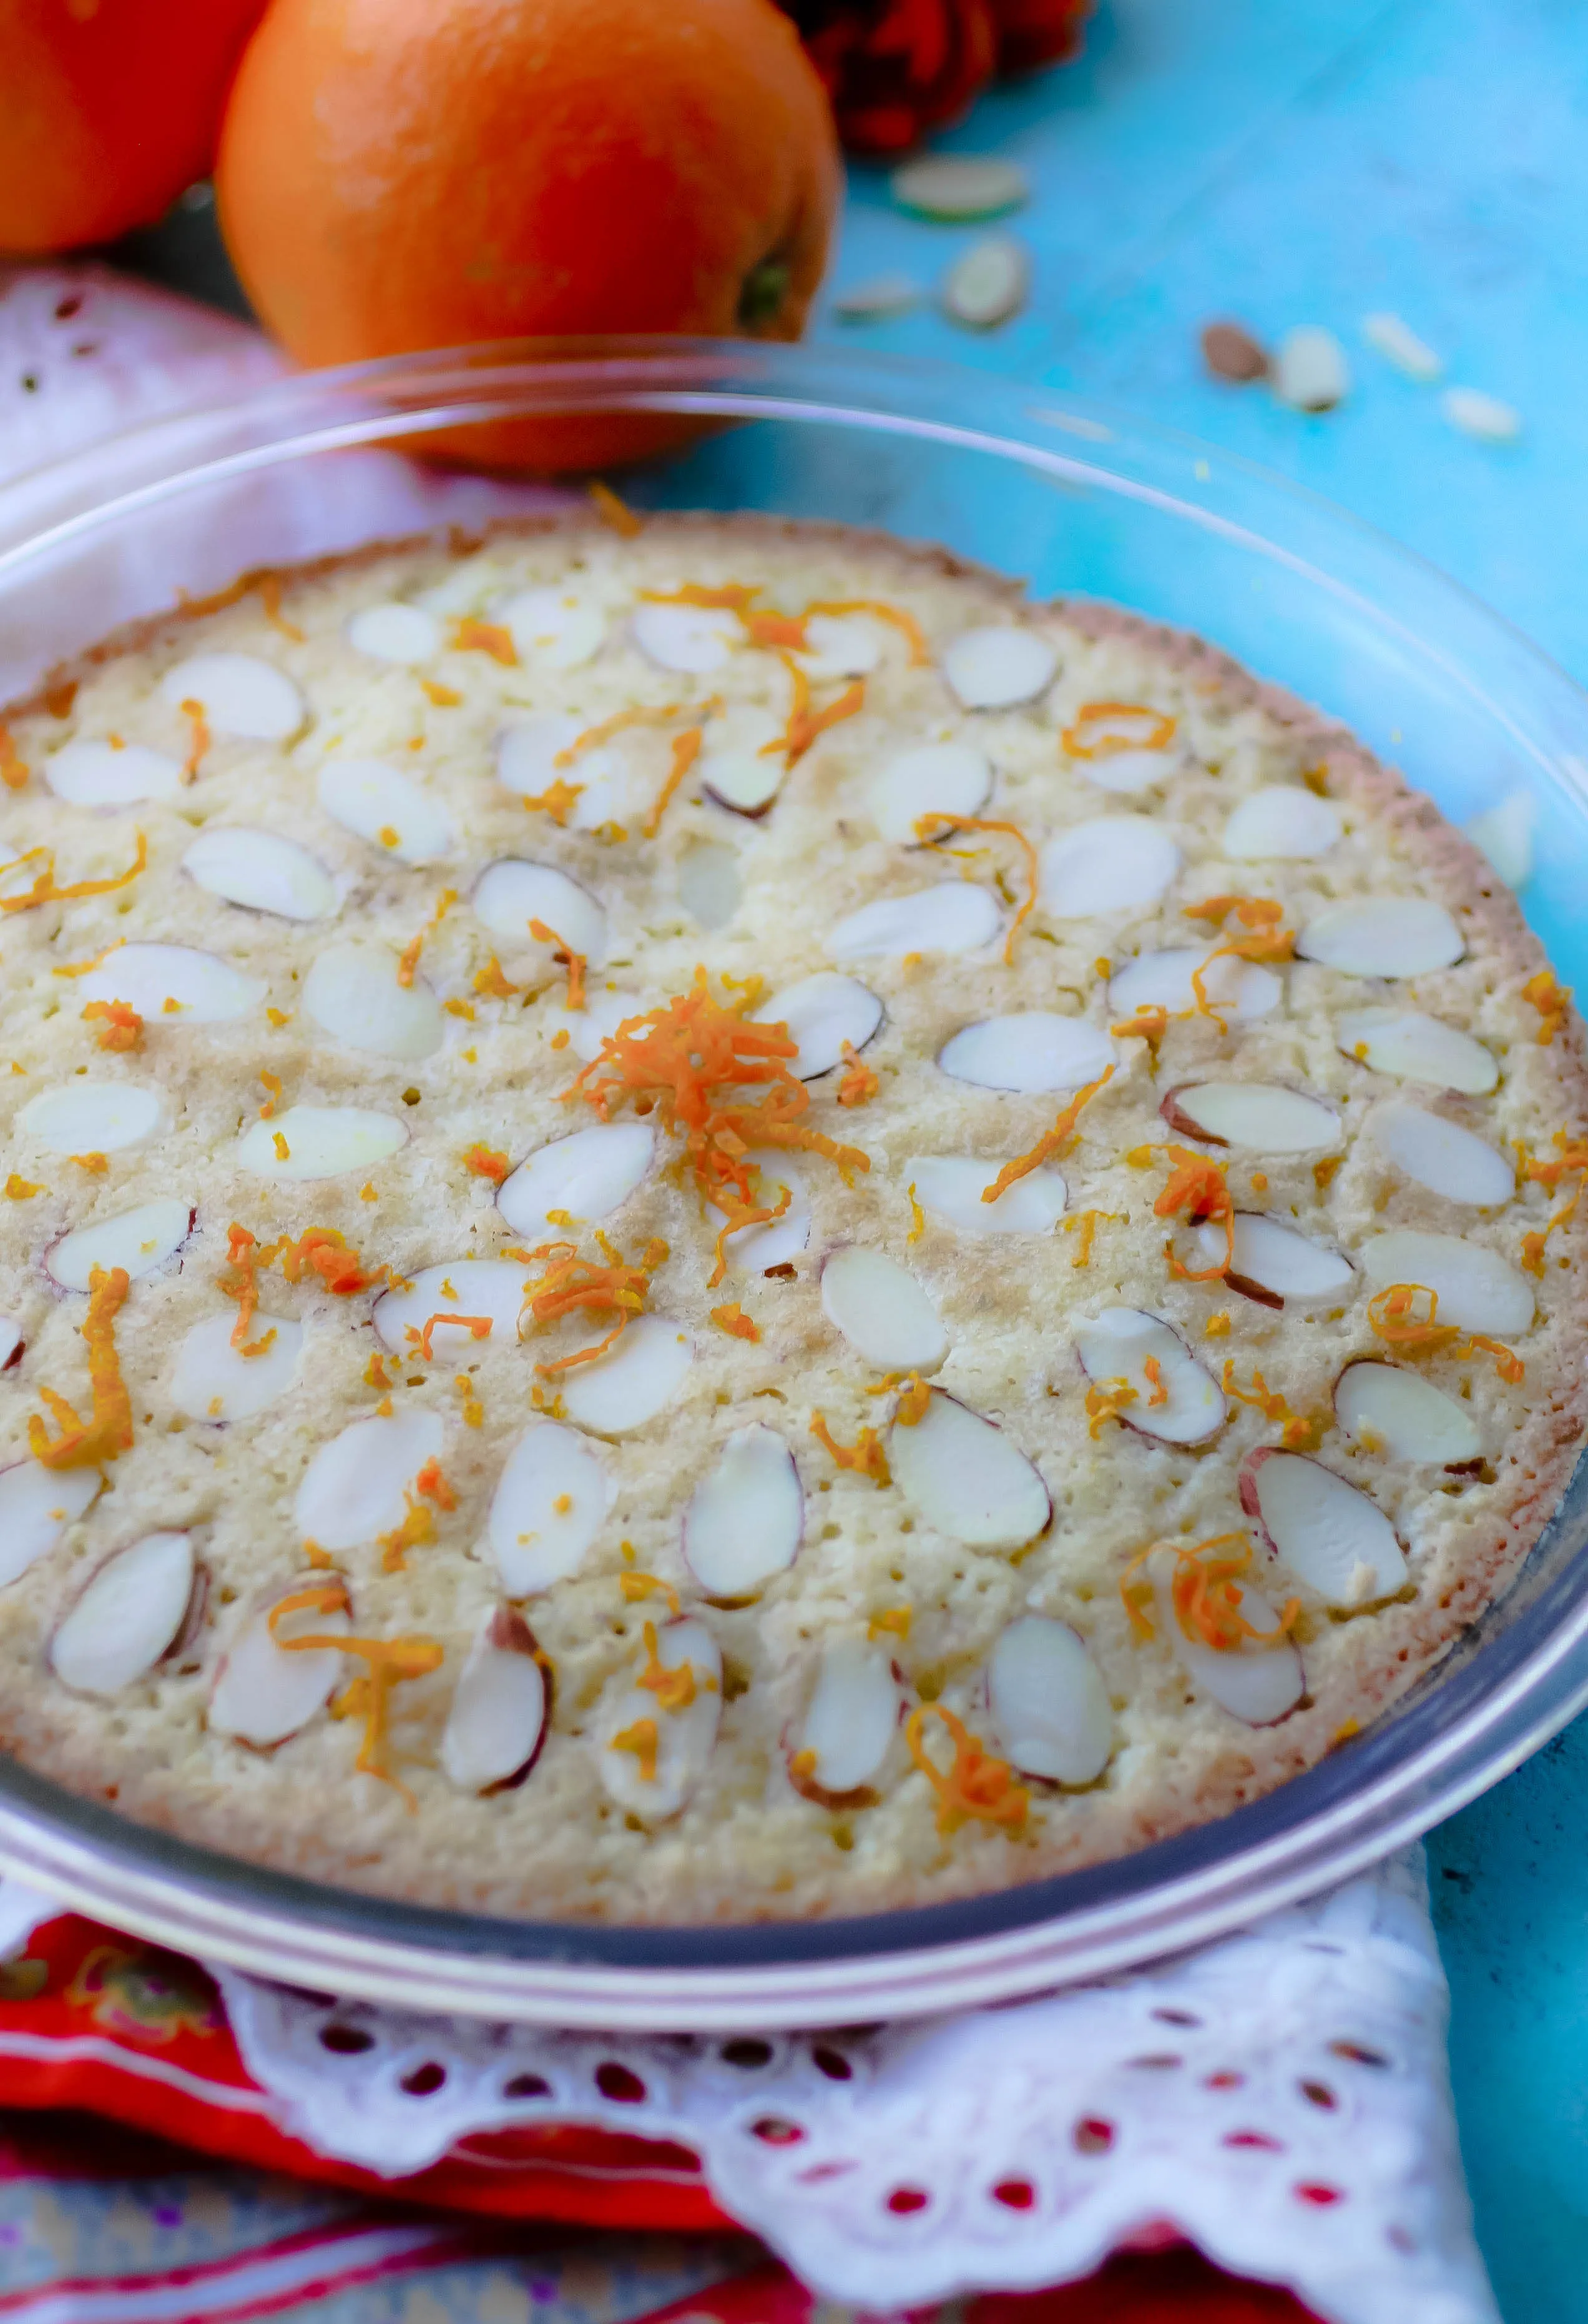 Almond-Orange Sunshine Cake is a dessert that's sure to please! Almond-Orange Sunshine Cake is big on flavor and so easy to make!